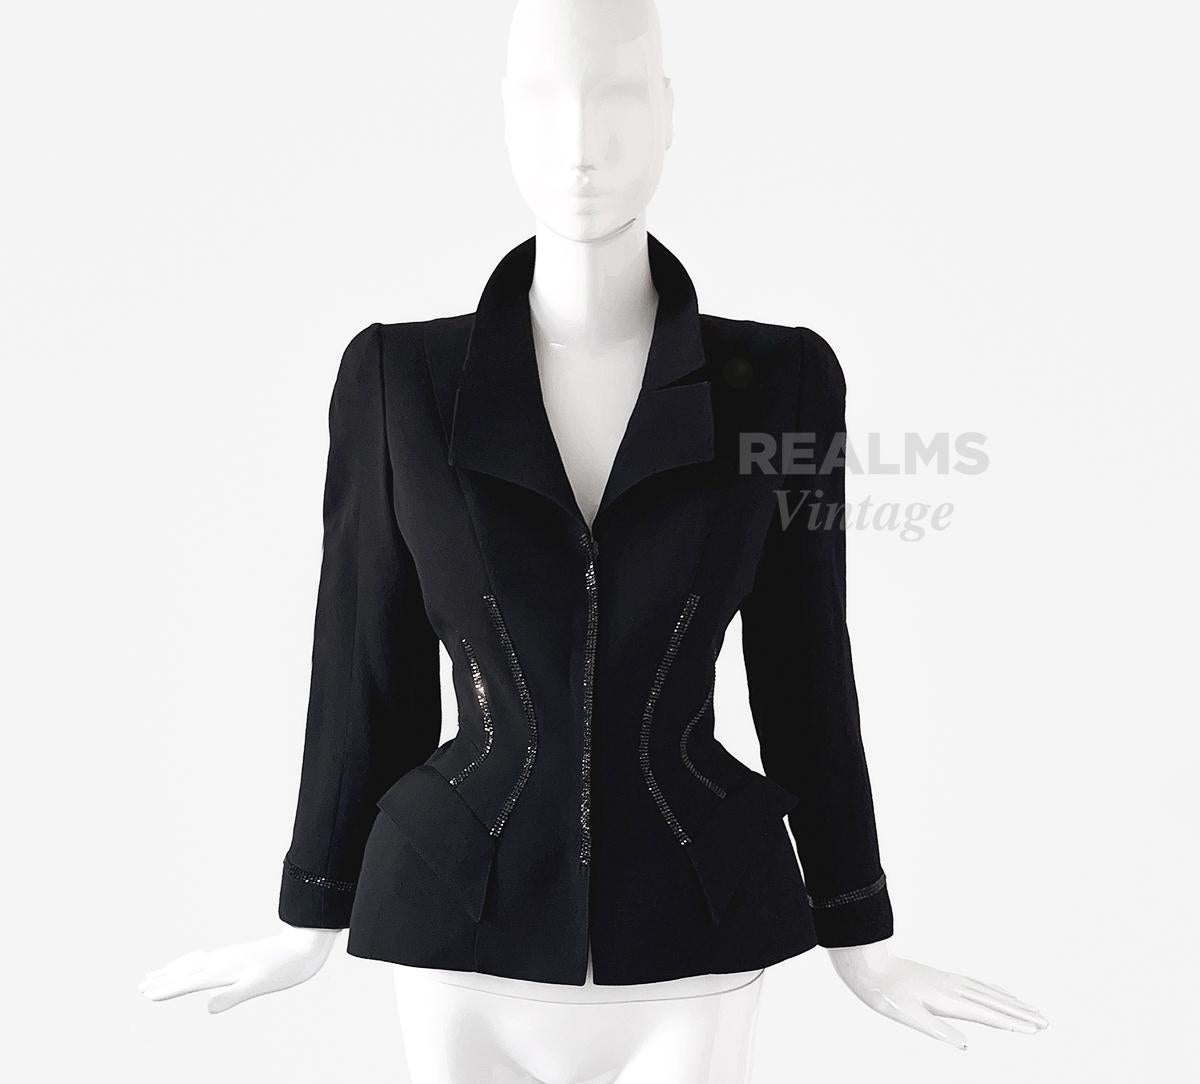 Women's ICONIC Thierry Mugler FW 1998 Crystal Jacket Ensemble Famous Helmut Newton  For Sale